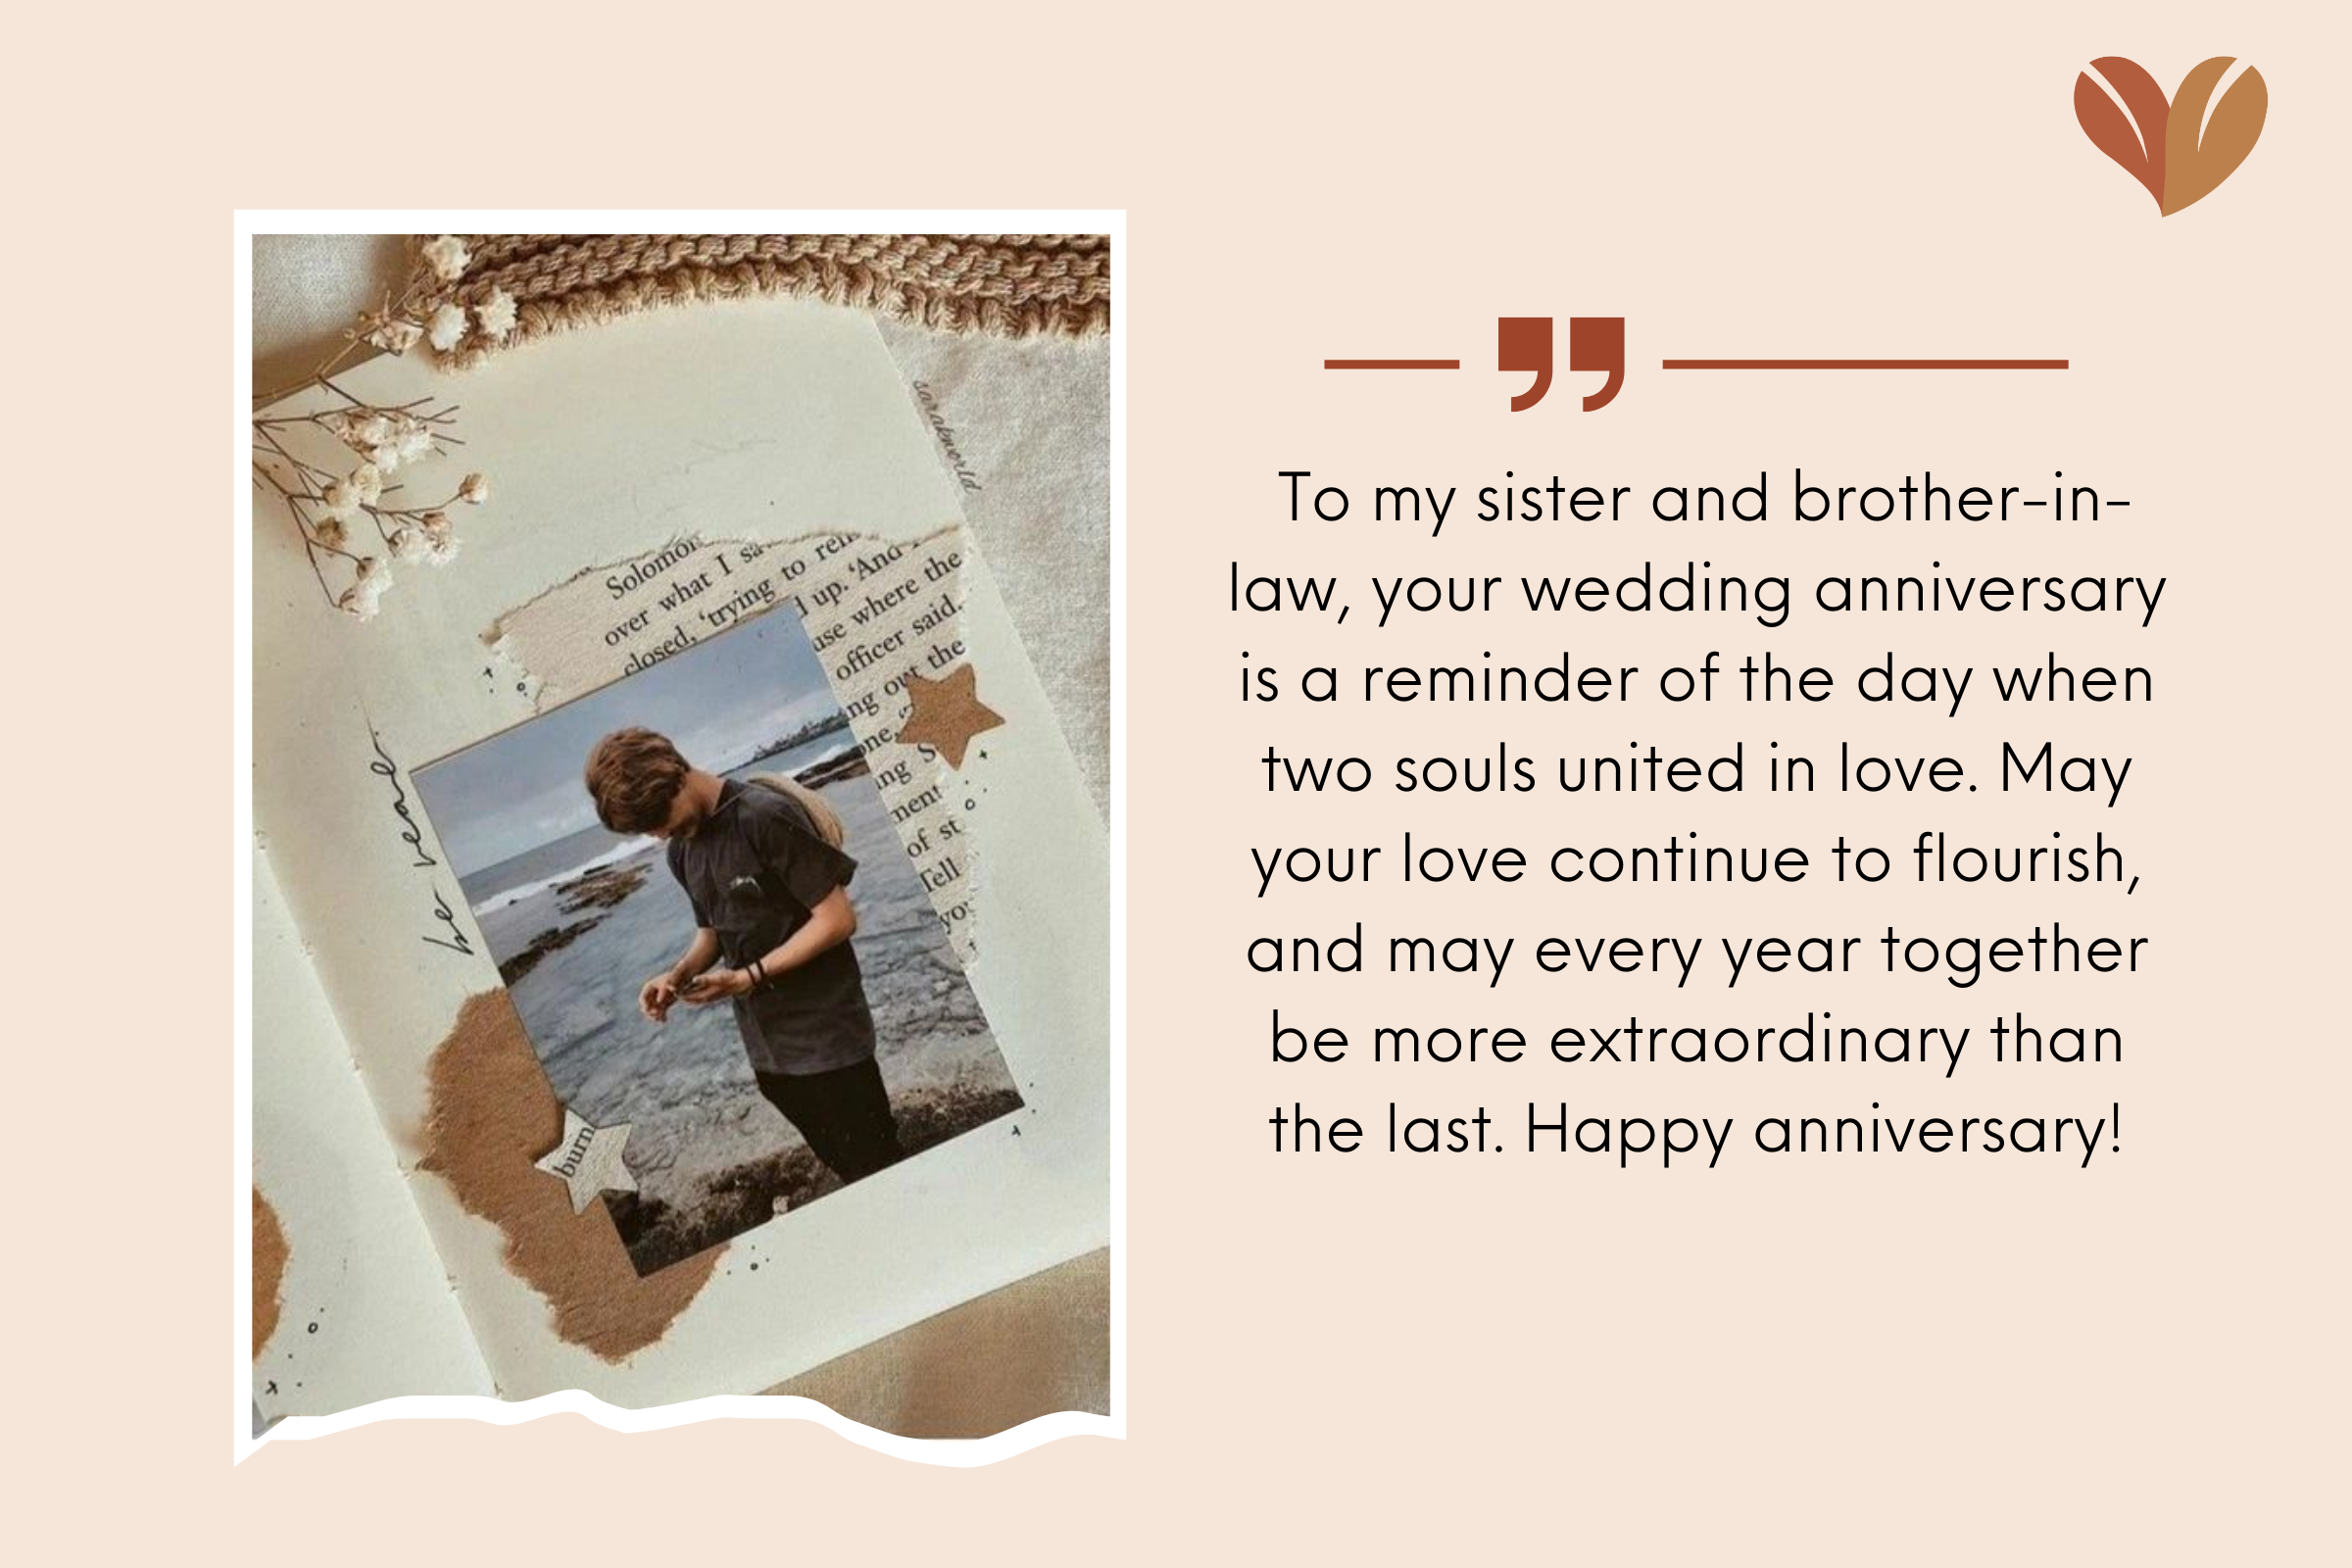 Spreading love to your sister and brother in law by these wishes